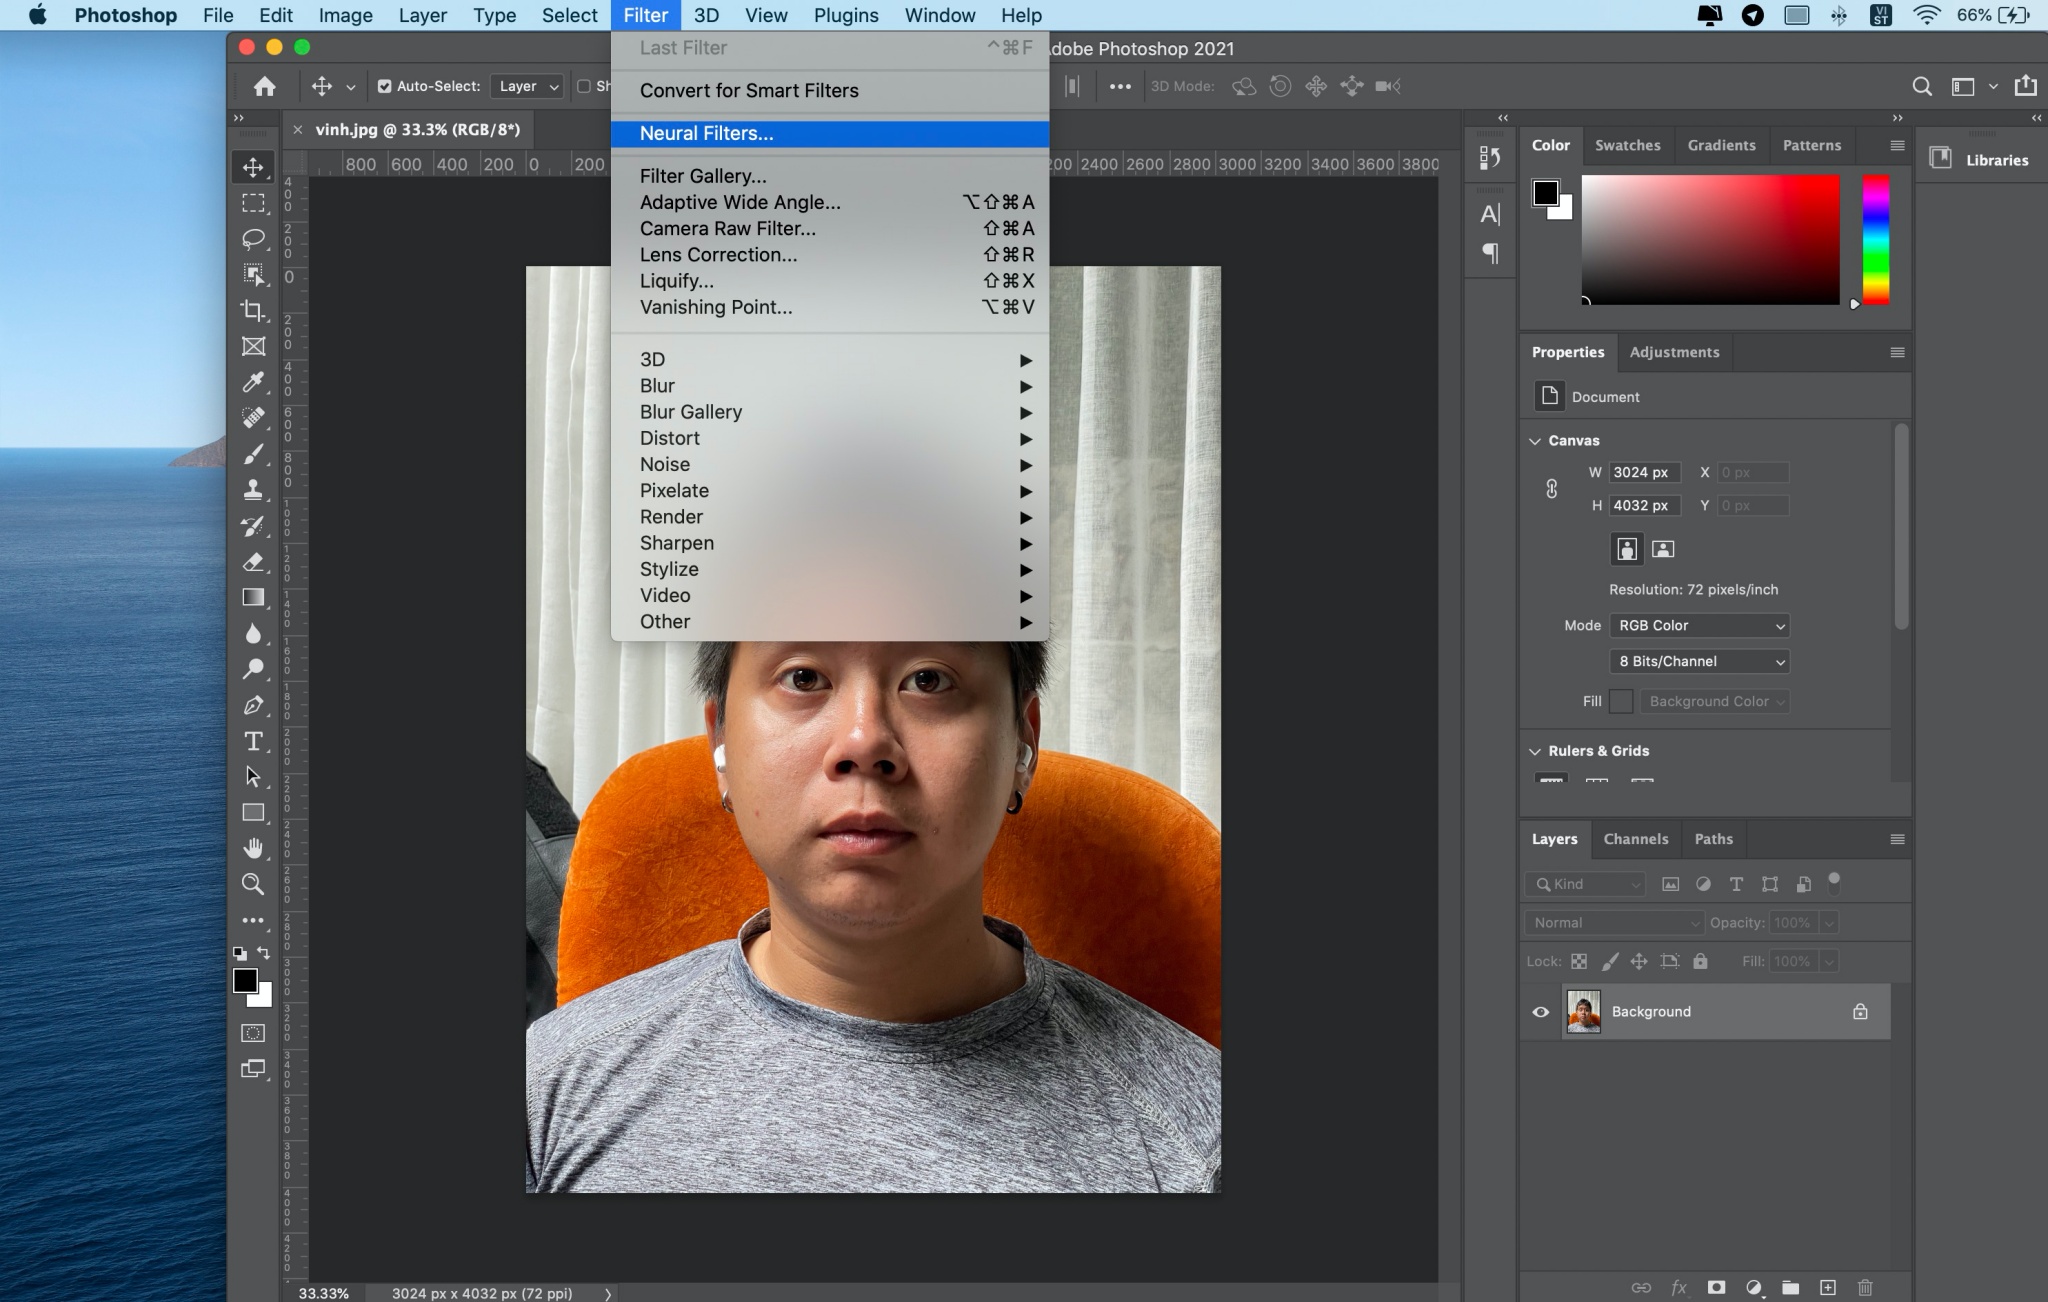 pts portable Photoshop 2021 full